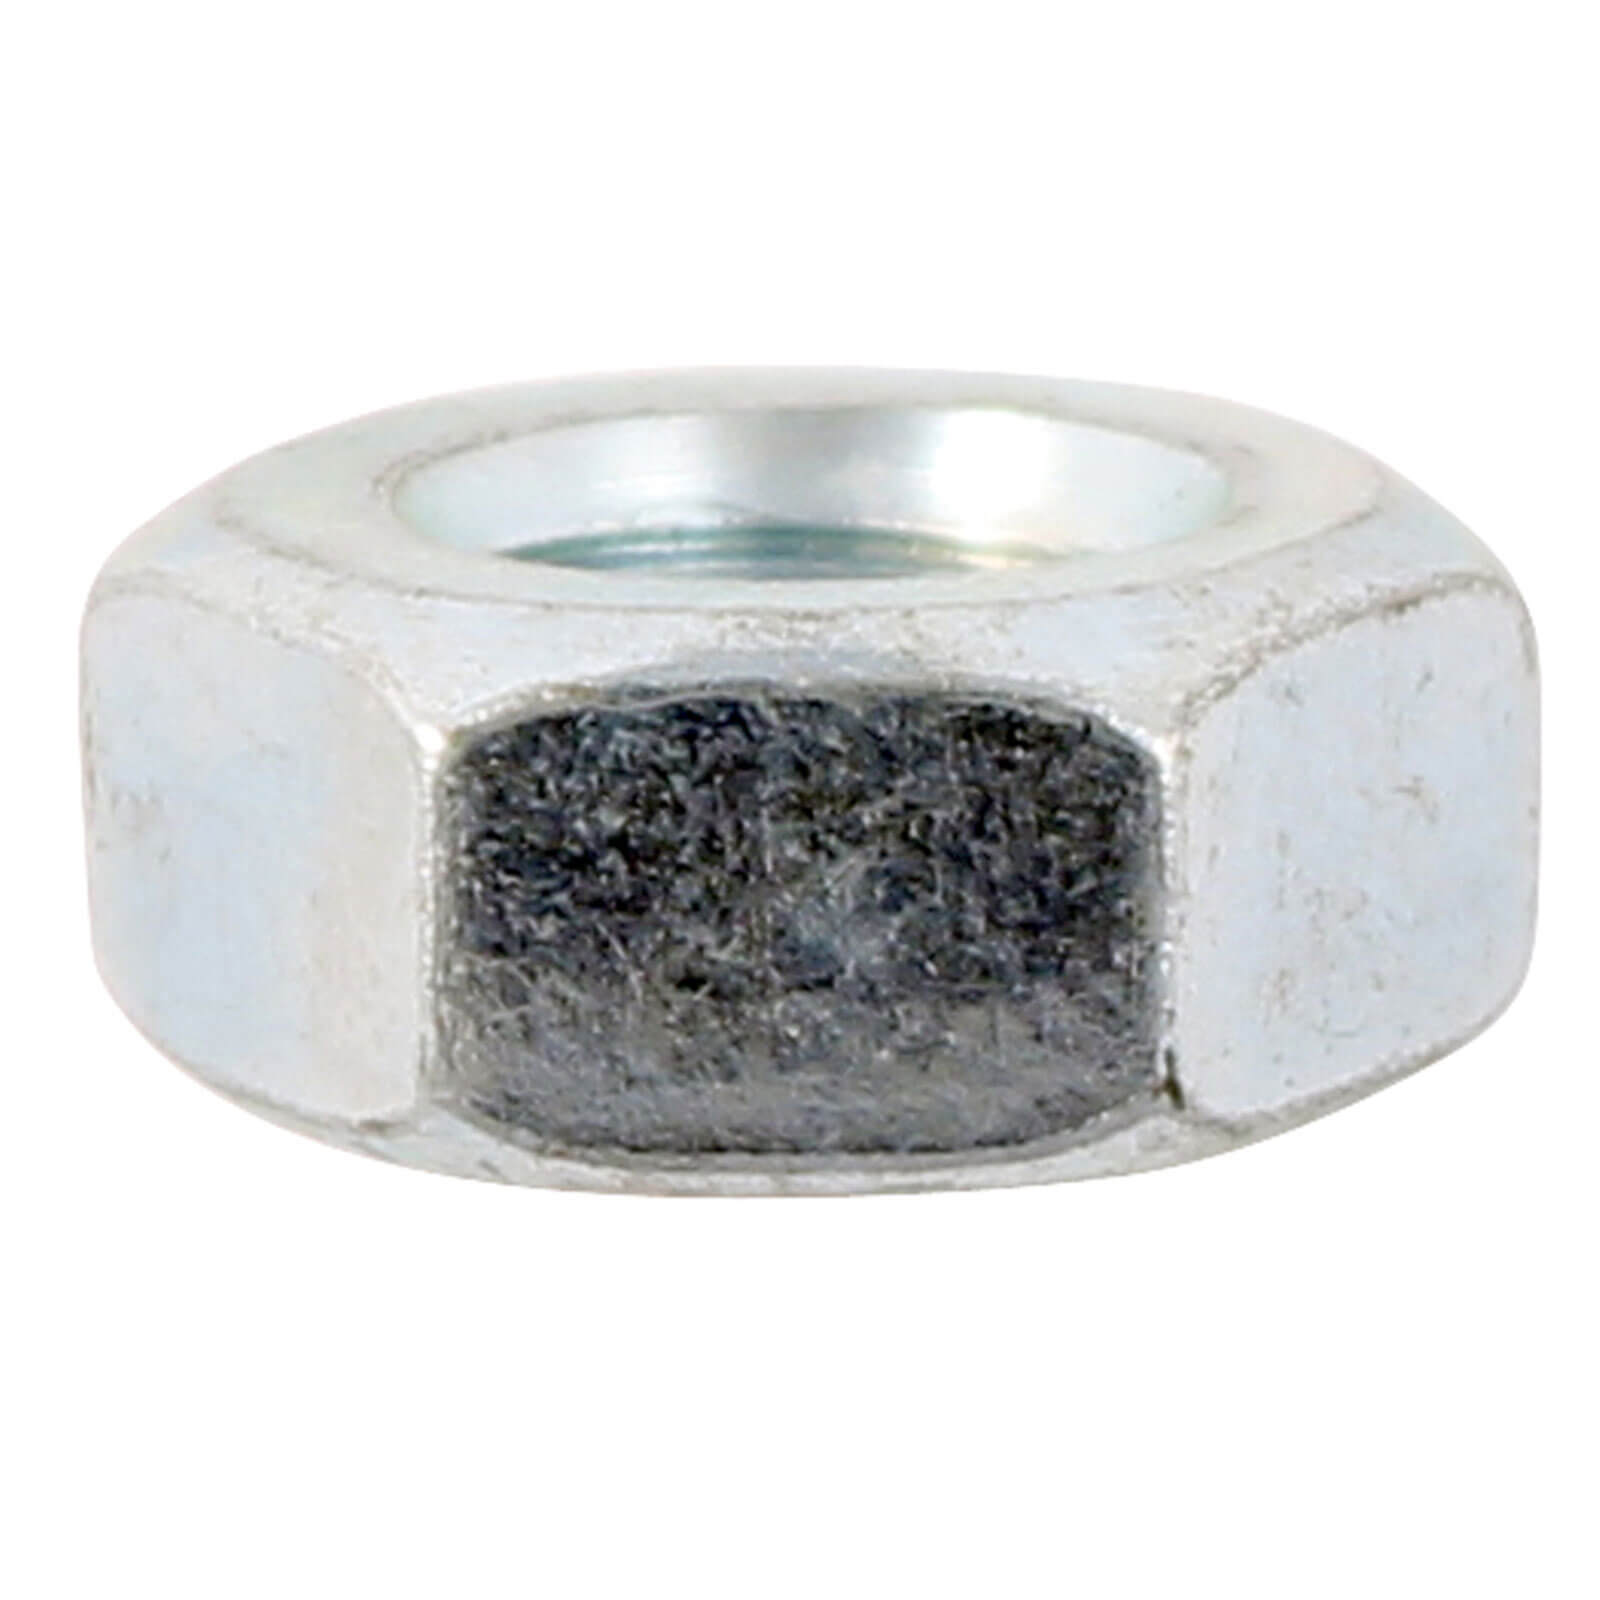 Image of Sirius A4 316 Hex Full Nut Stainless Steel M4